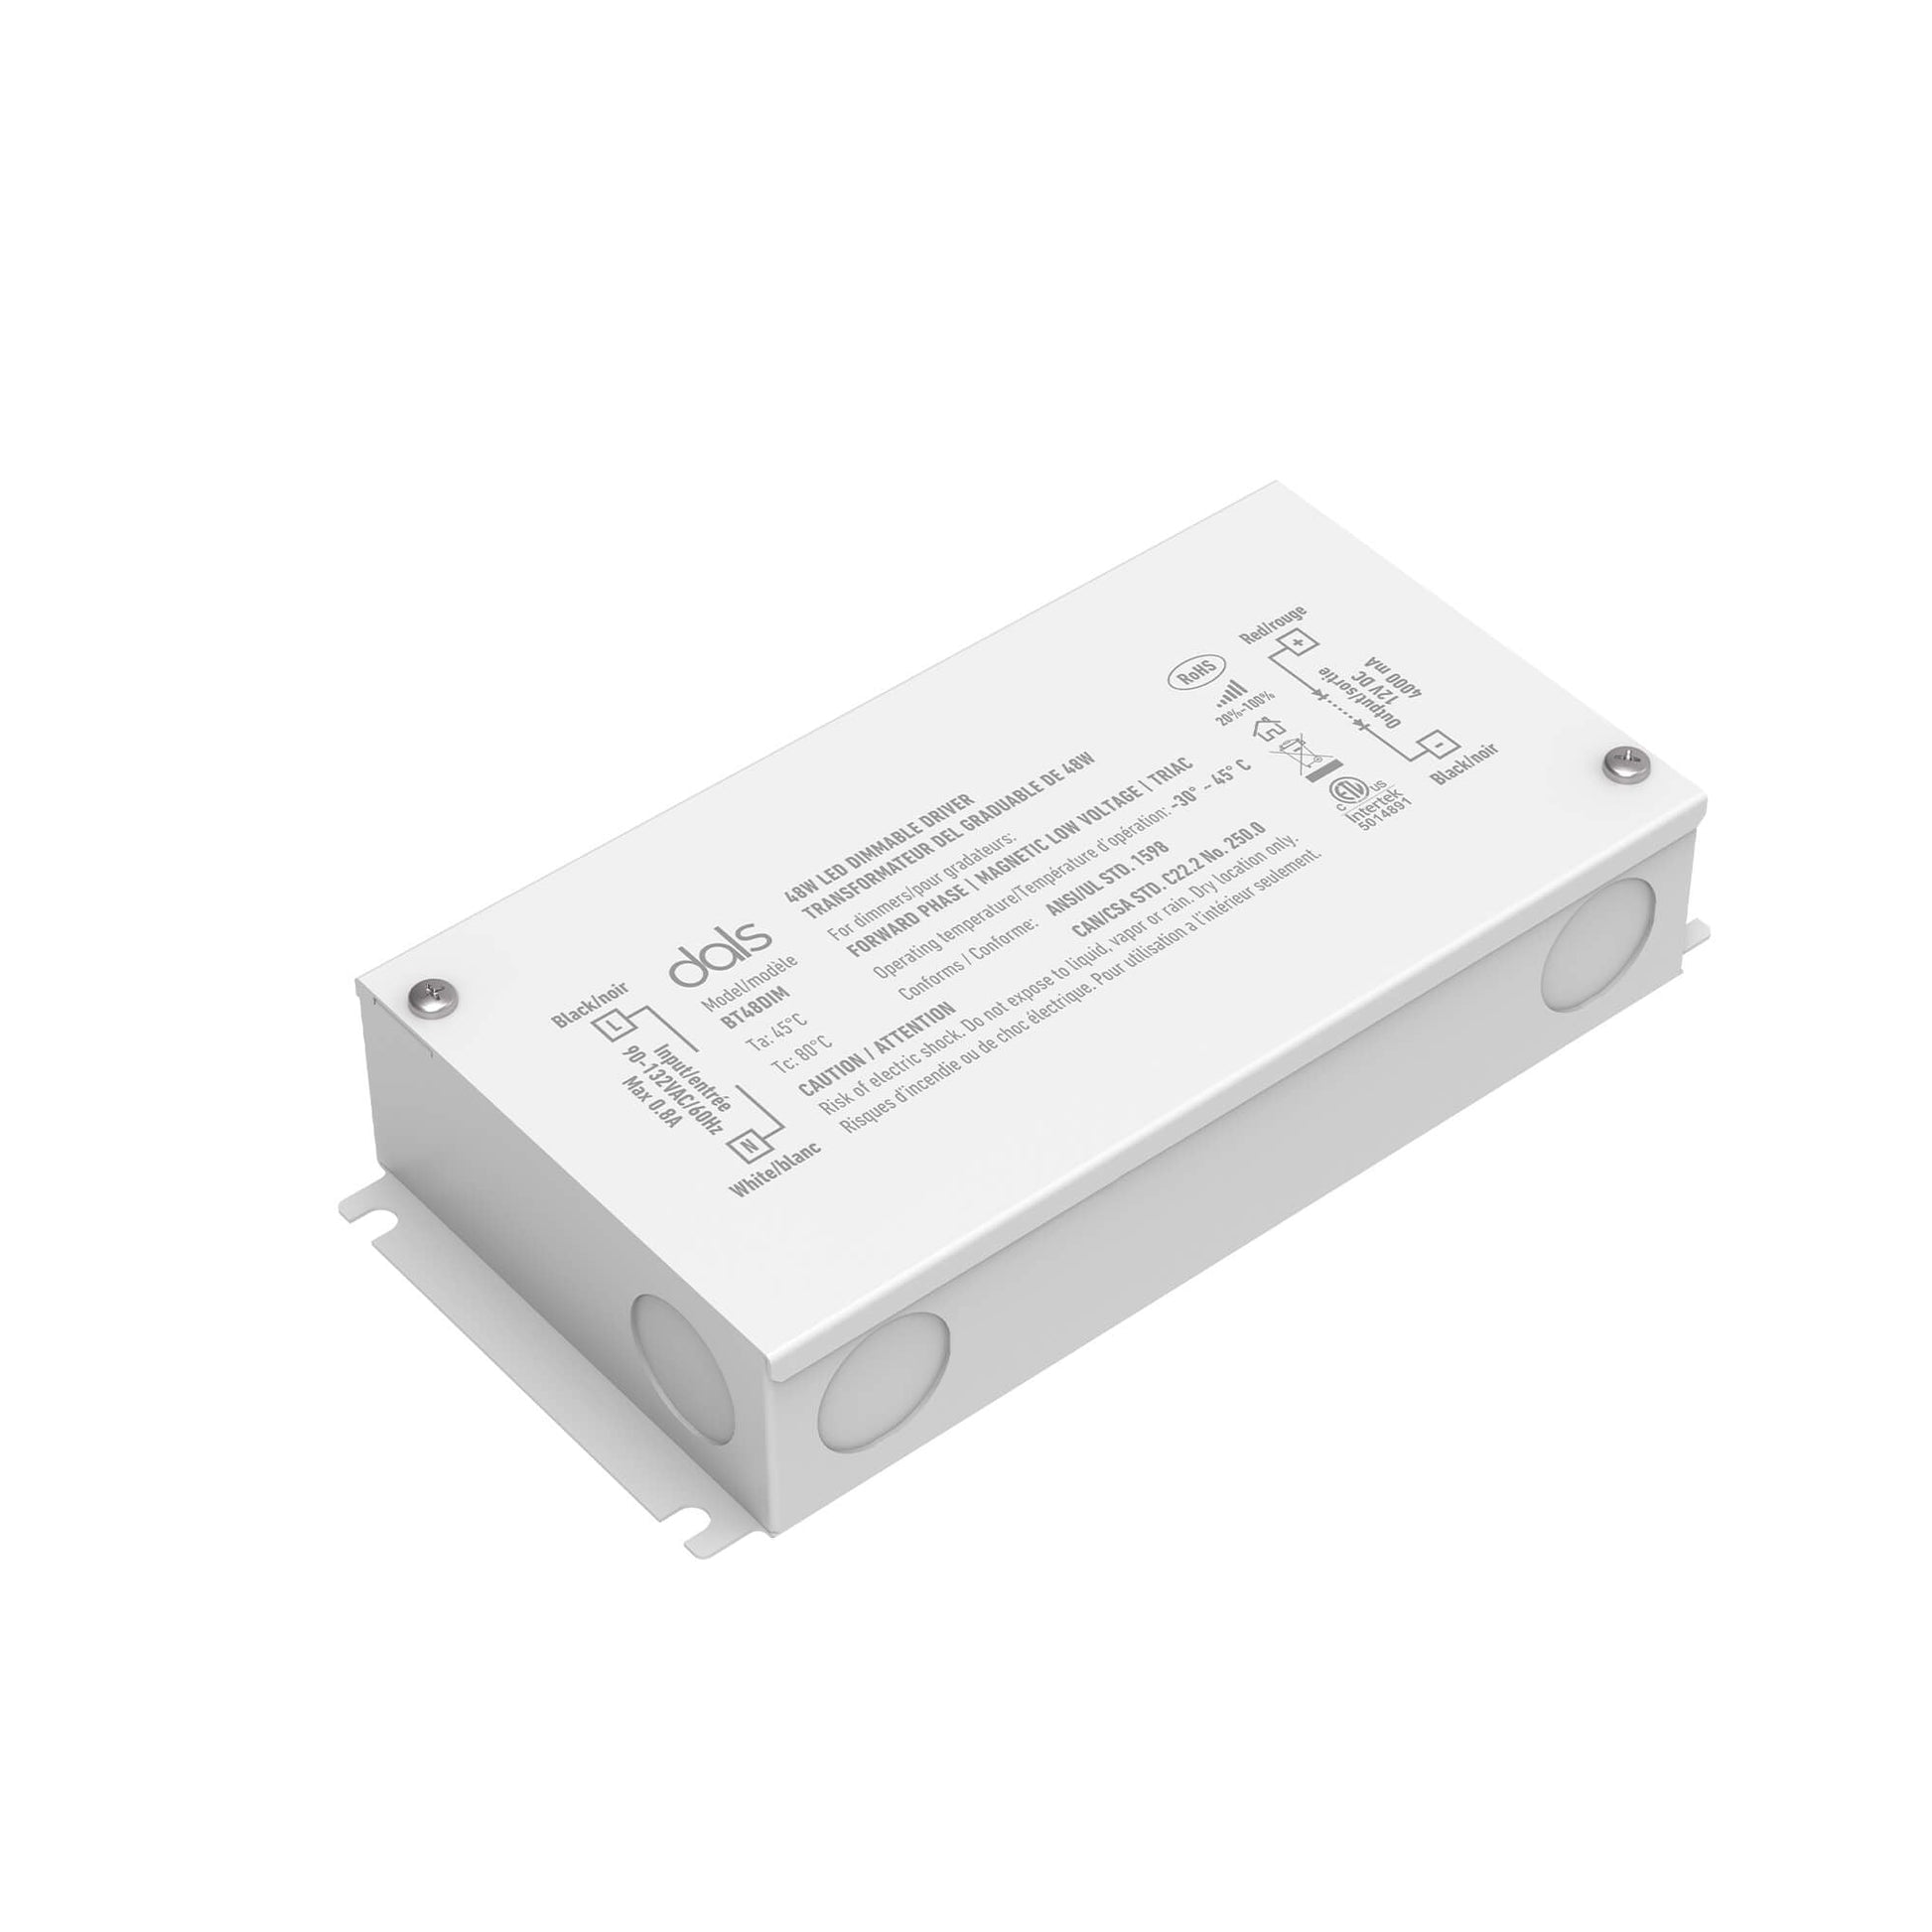 DALS-BT48DIM-ICDals Lighting BTXXDIM-IC 12VDC Dimmable LED Driver